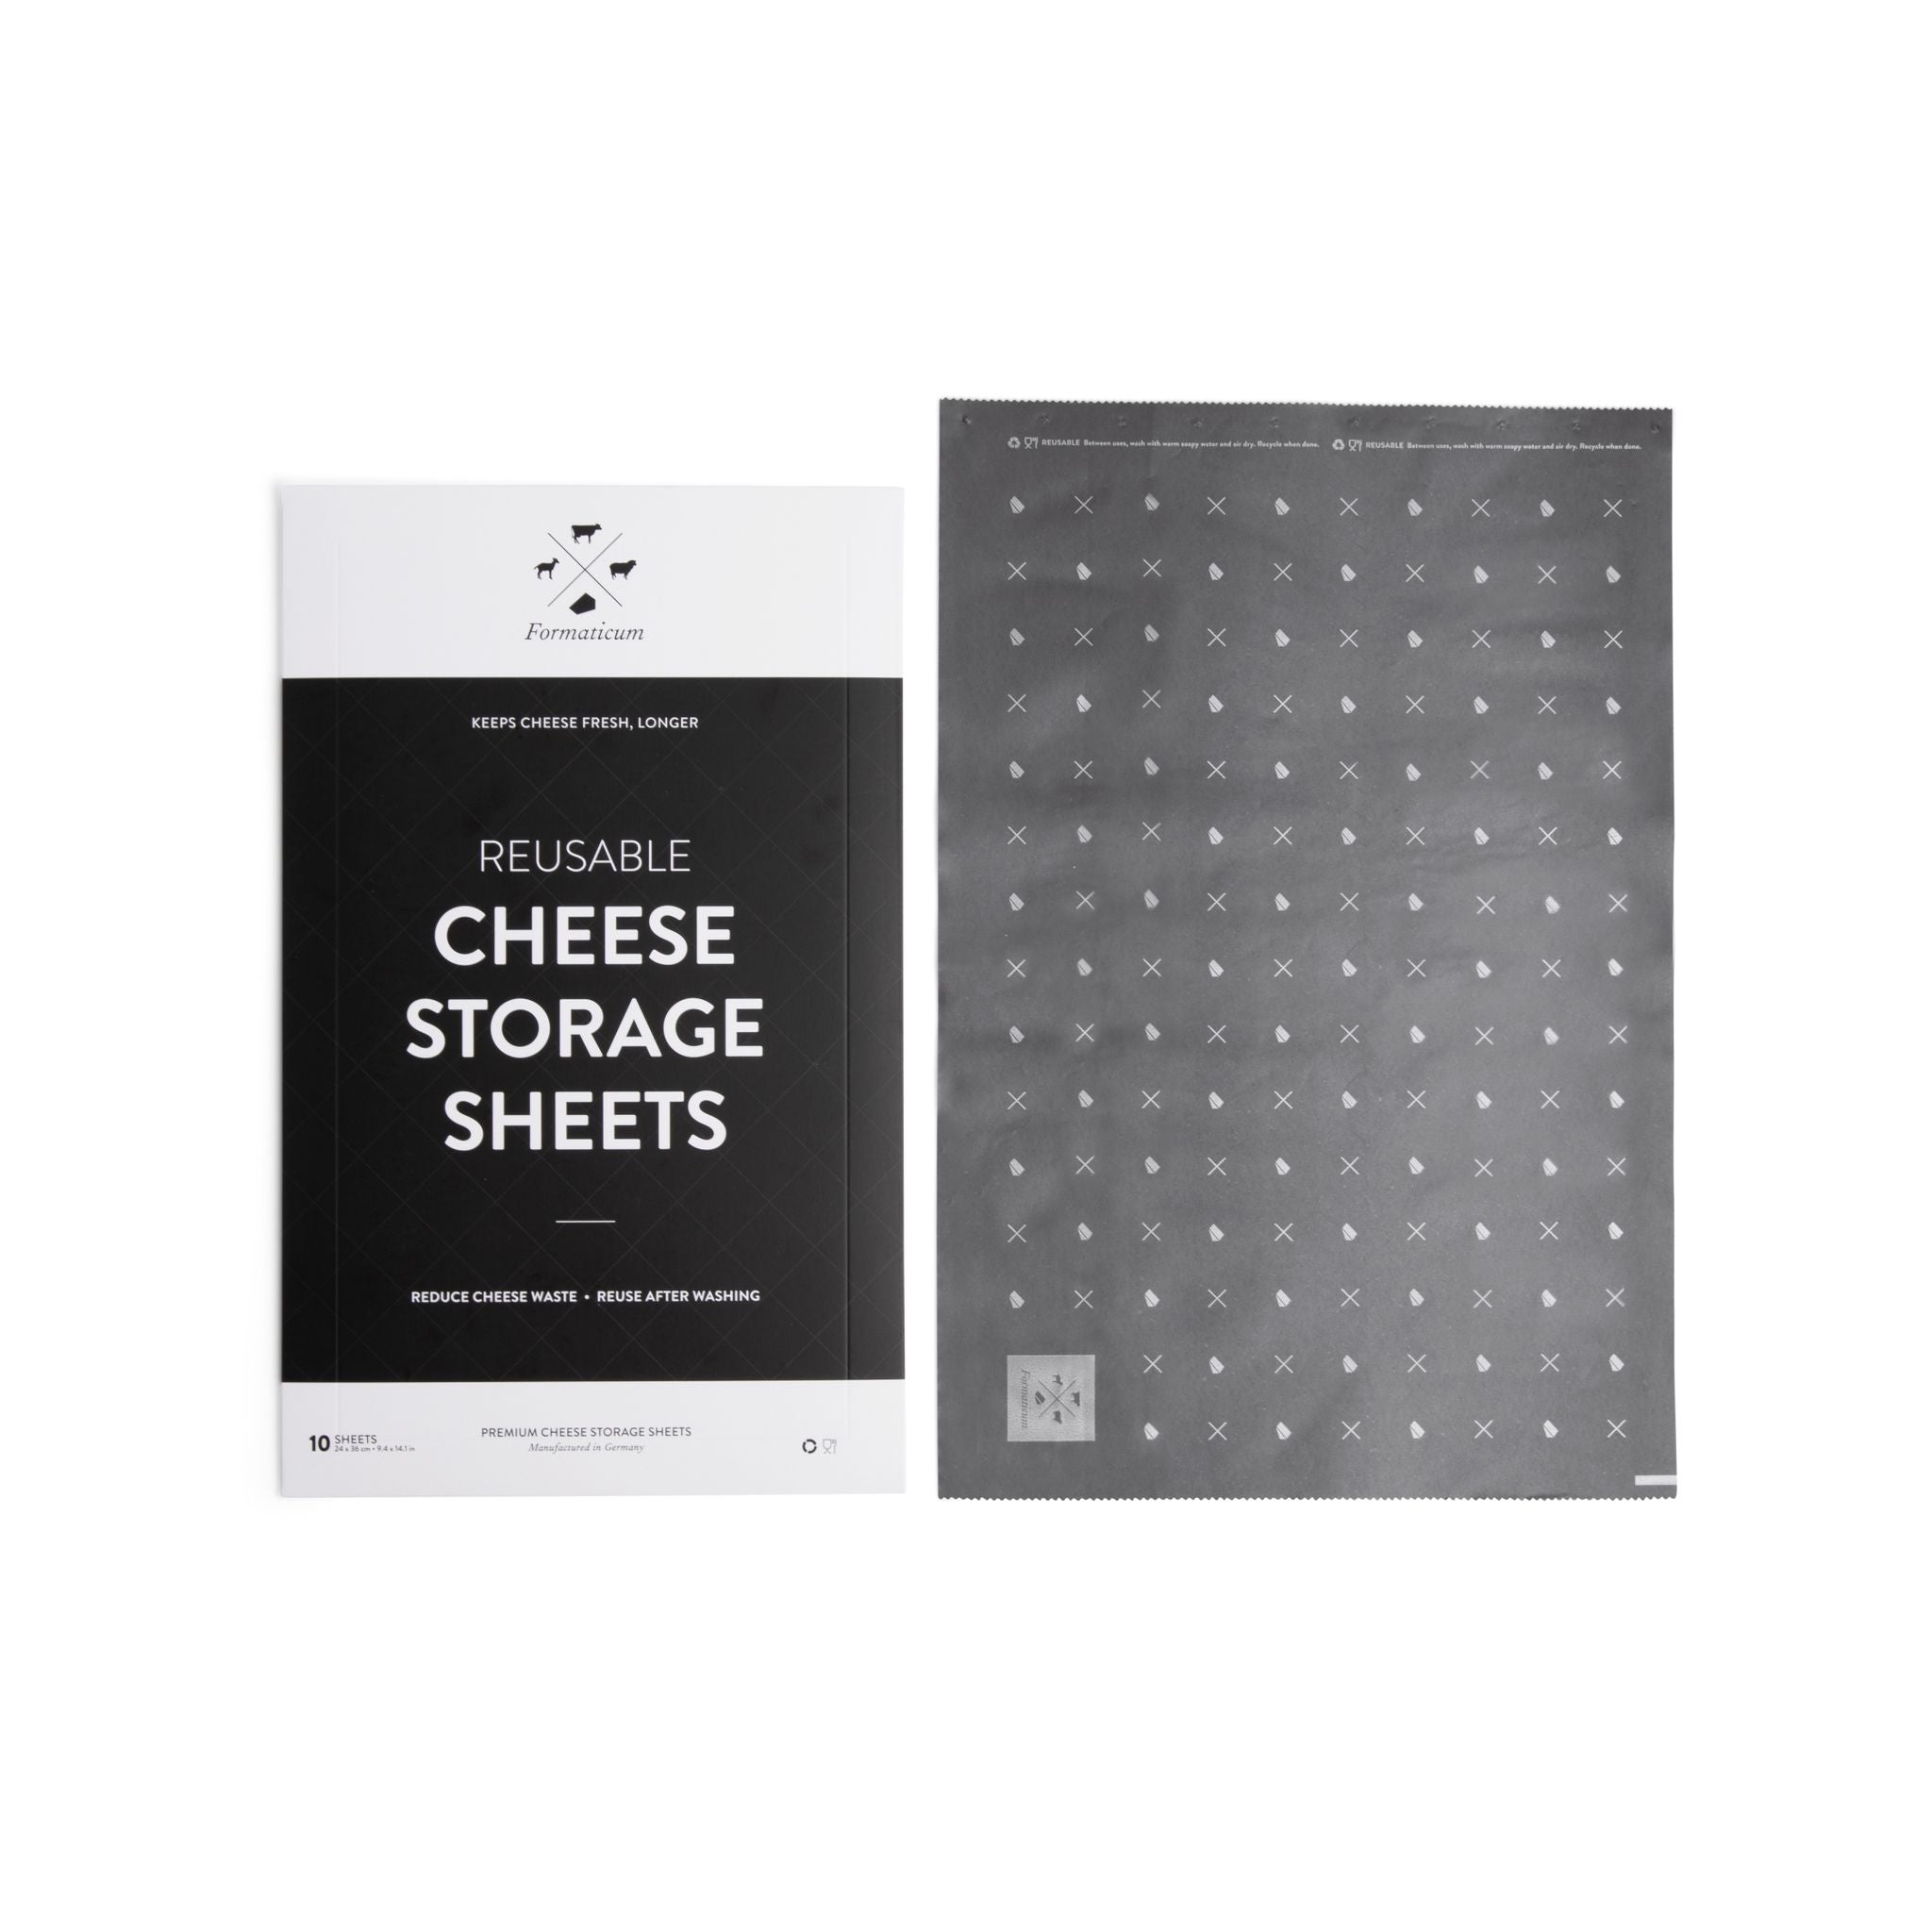 Formaticum Cheese Storage Wax Coated Paper - Porous Wax Sheets From France  - Keep Cheese or Charcuterie Fresh - Professional Grade Cheese Paper for